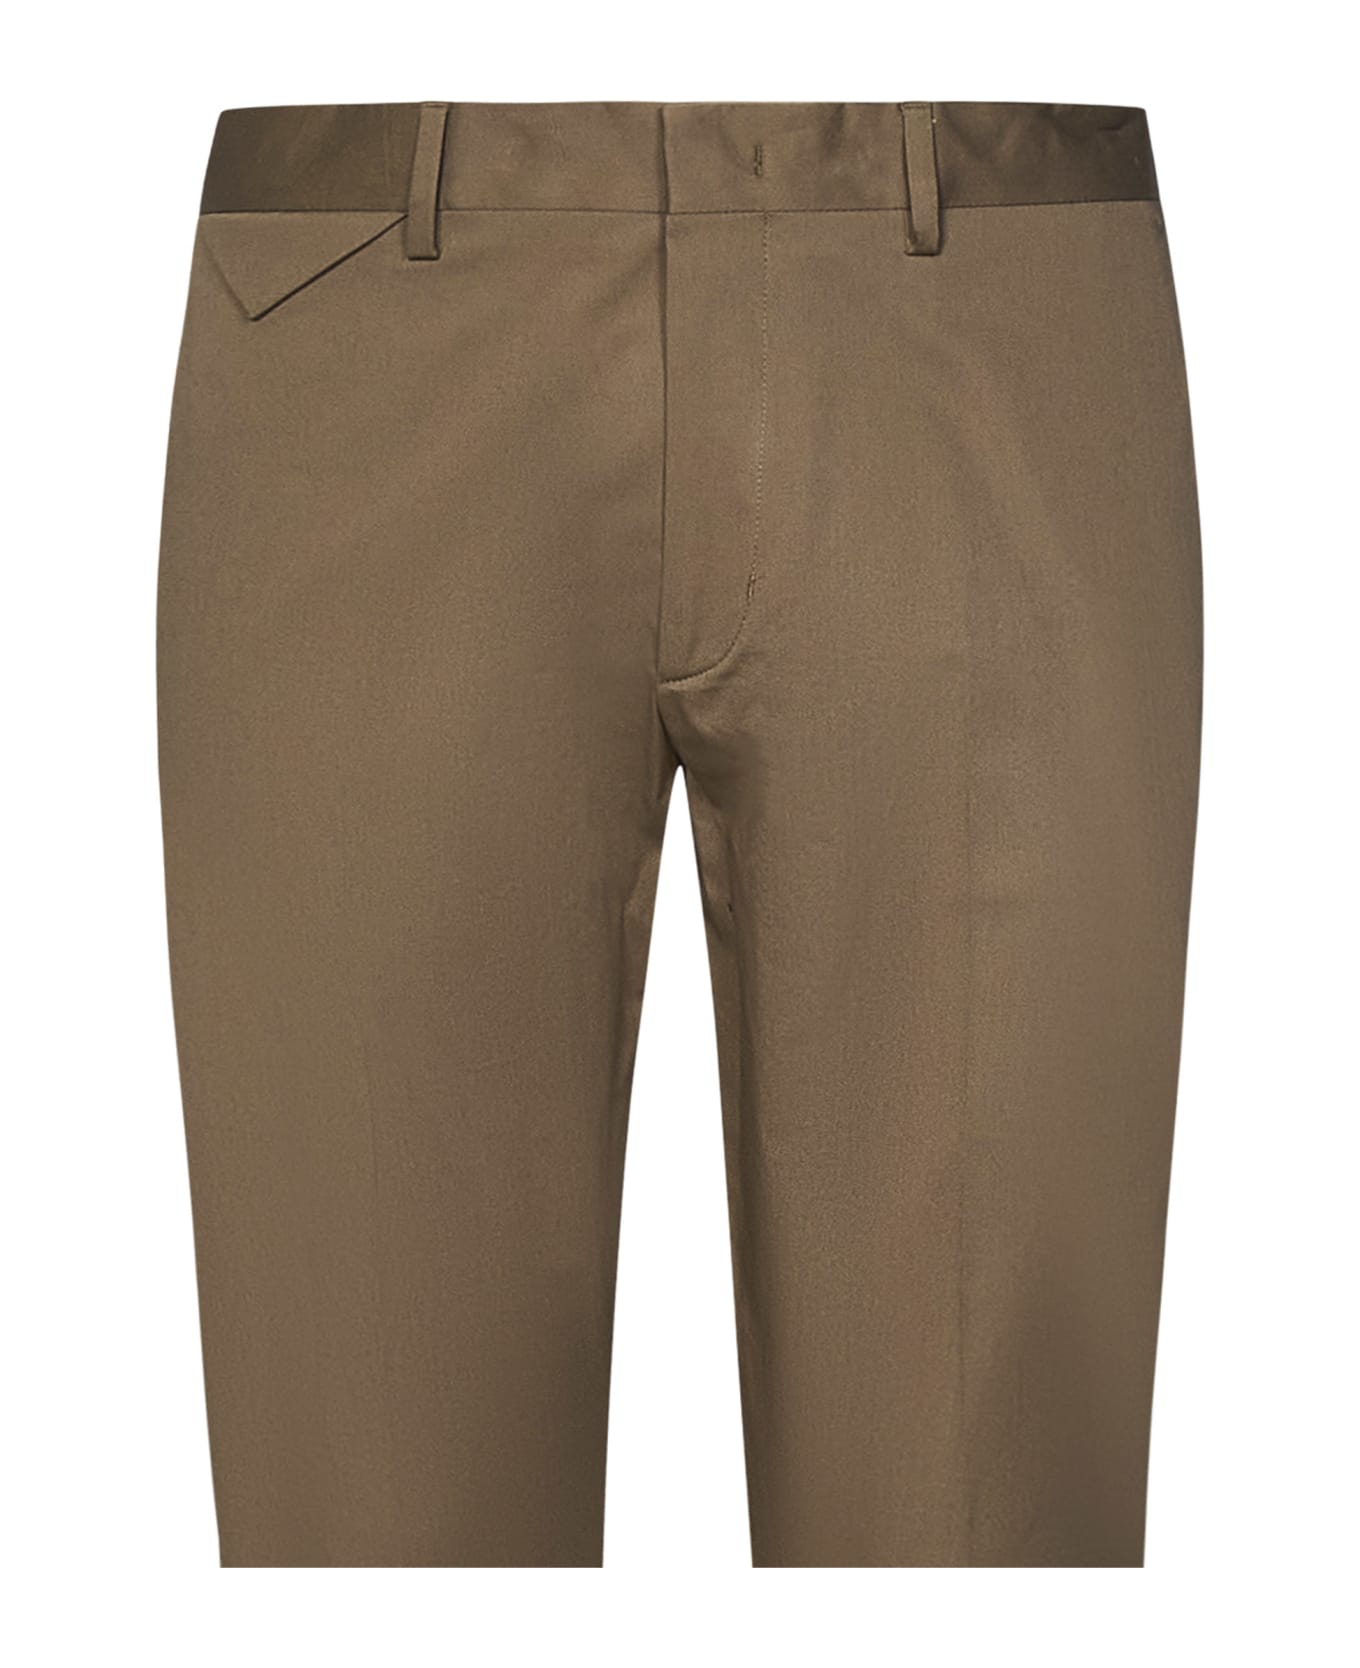 Low Brand Cooper T1.7 Trousers warmth - Brown